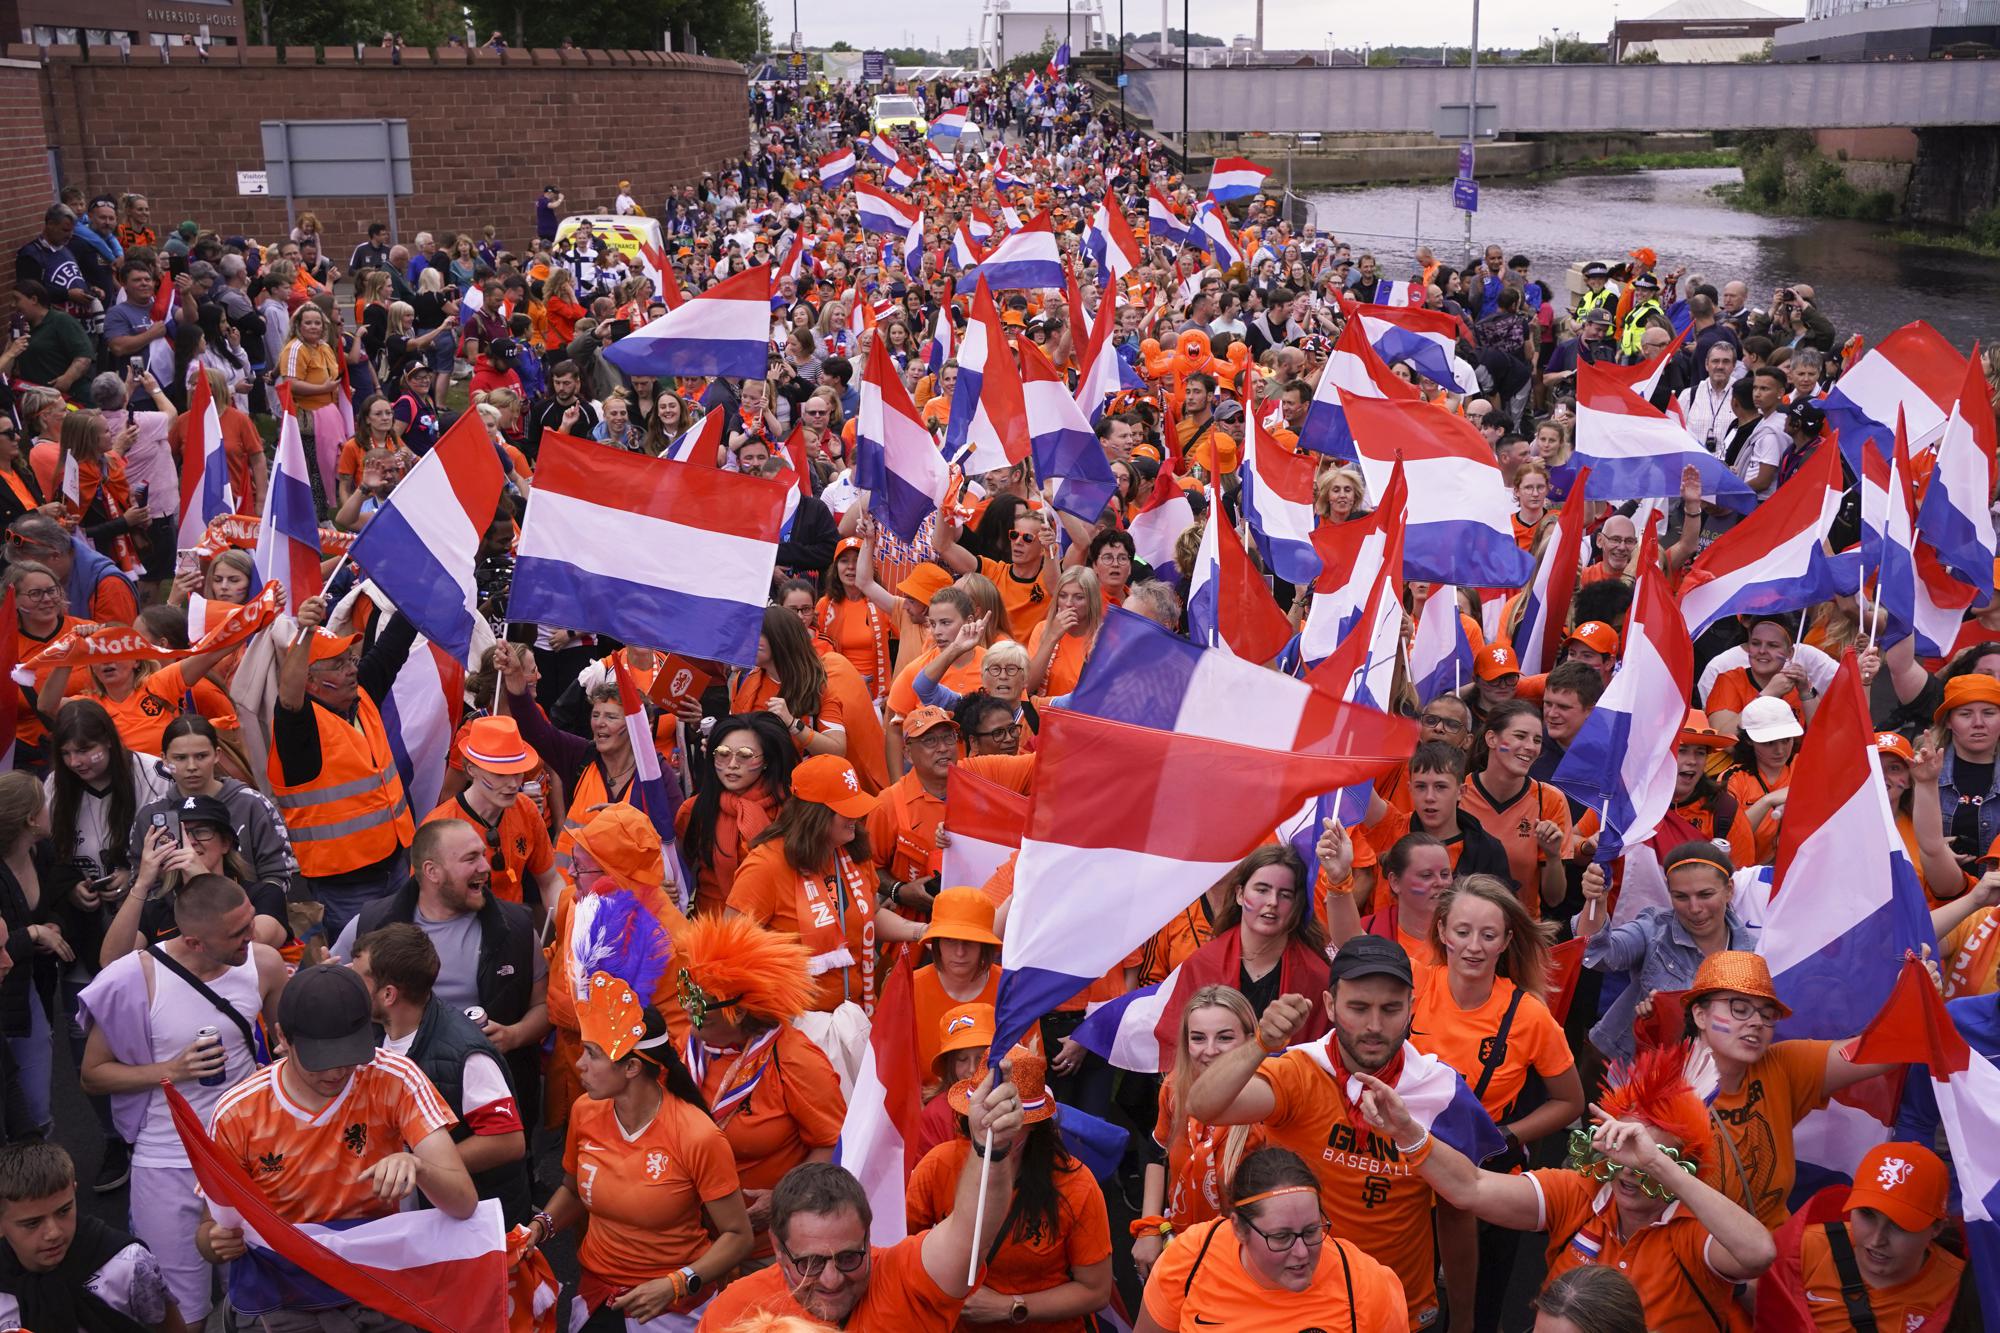 FILE - Netherlands supporters arrive at the stadium for the Women Euro 2022 quarterfinals soccer match between France and the Netherlands at the New York Stadium in Rotherham, England, Saturday, July 23, 2022. (AP Photo/Jon Super, File)